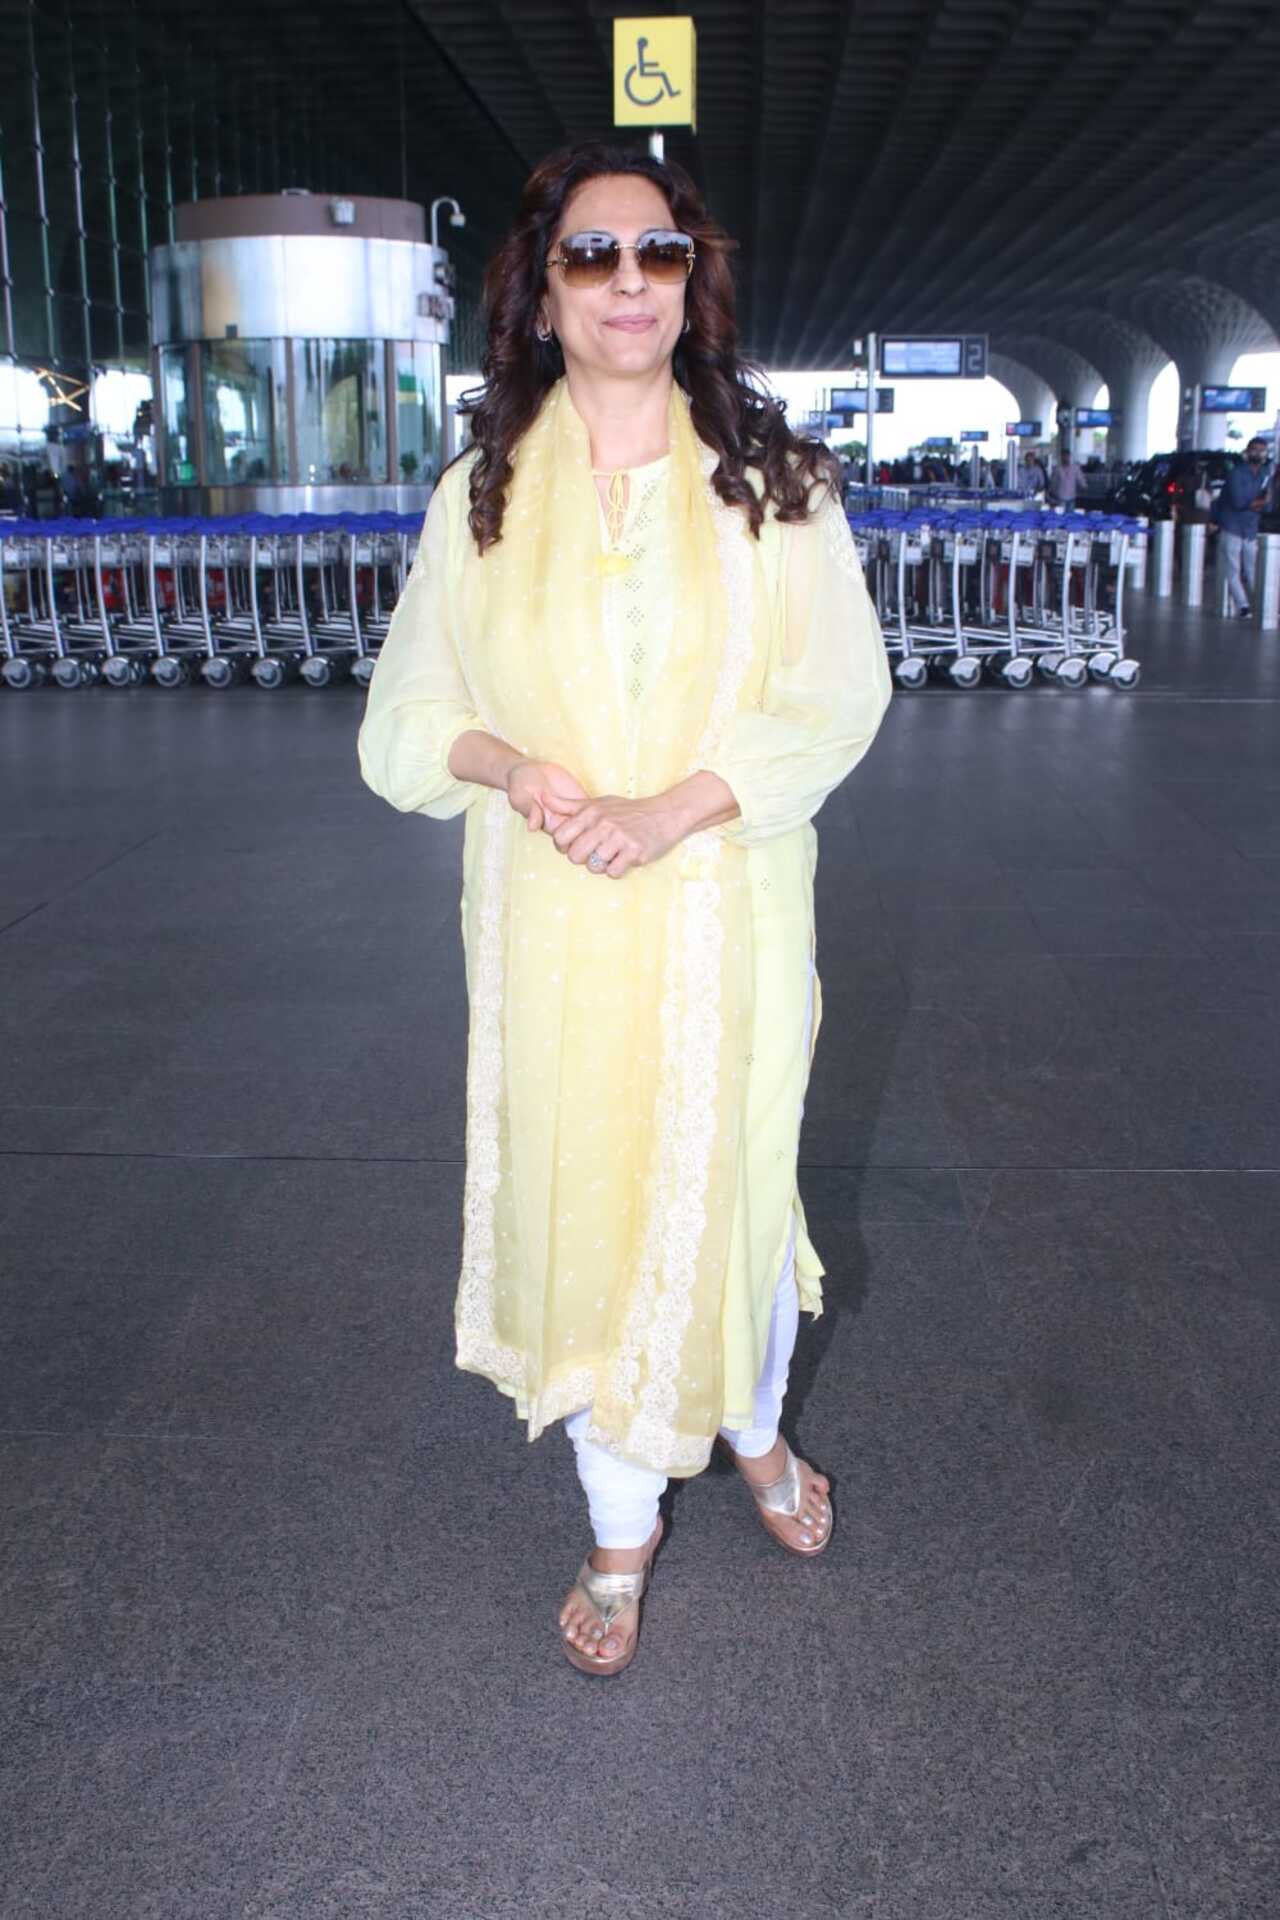 Juhi Chawla gave a sweet smile as she posed for the paparazzi at the airport